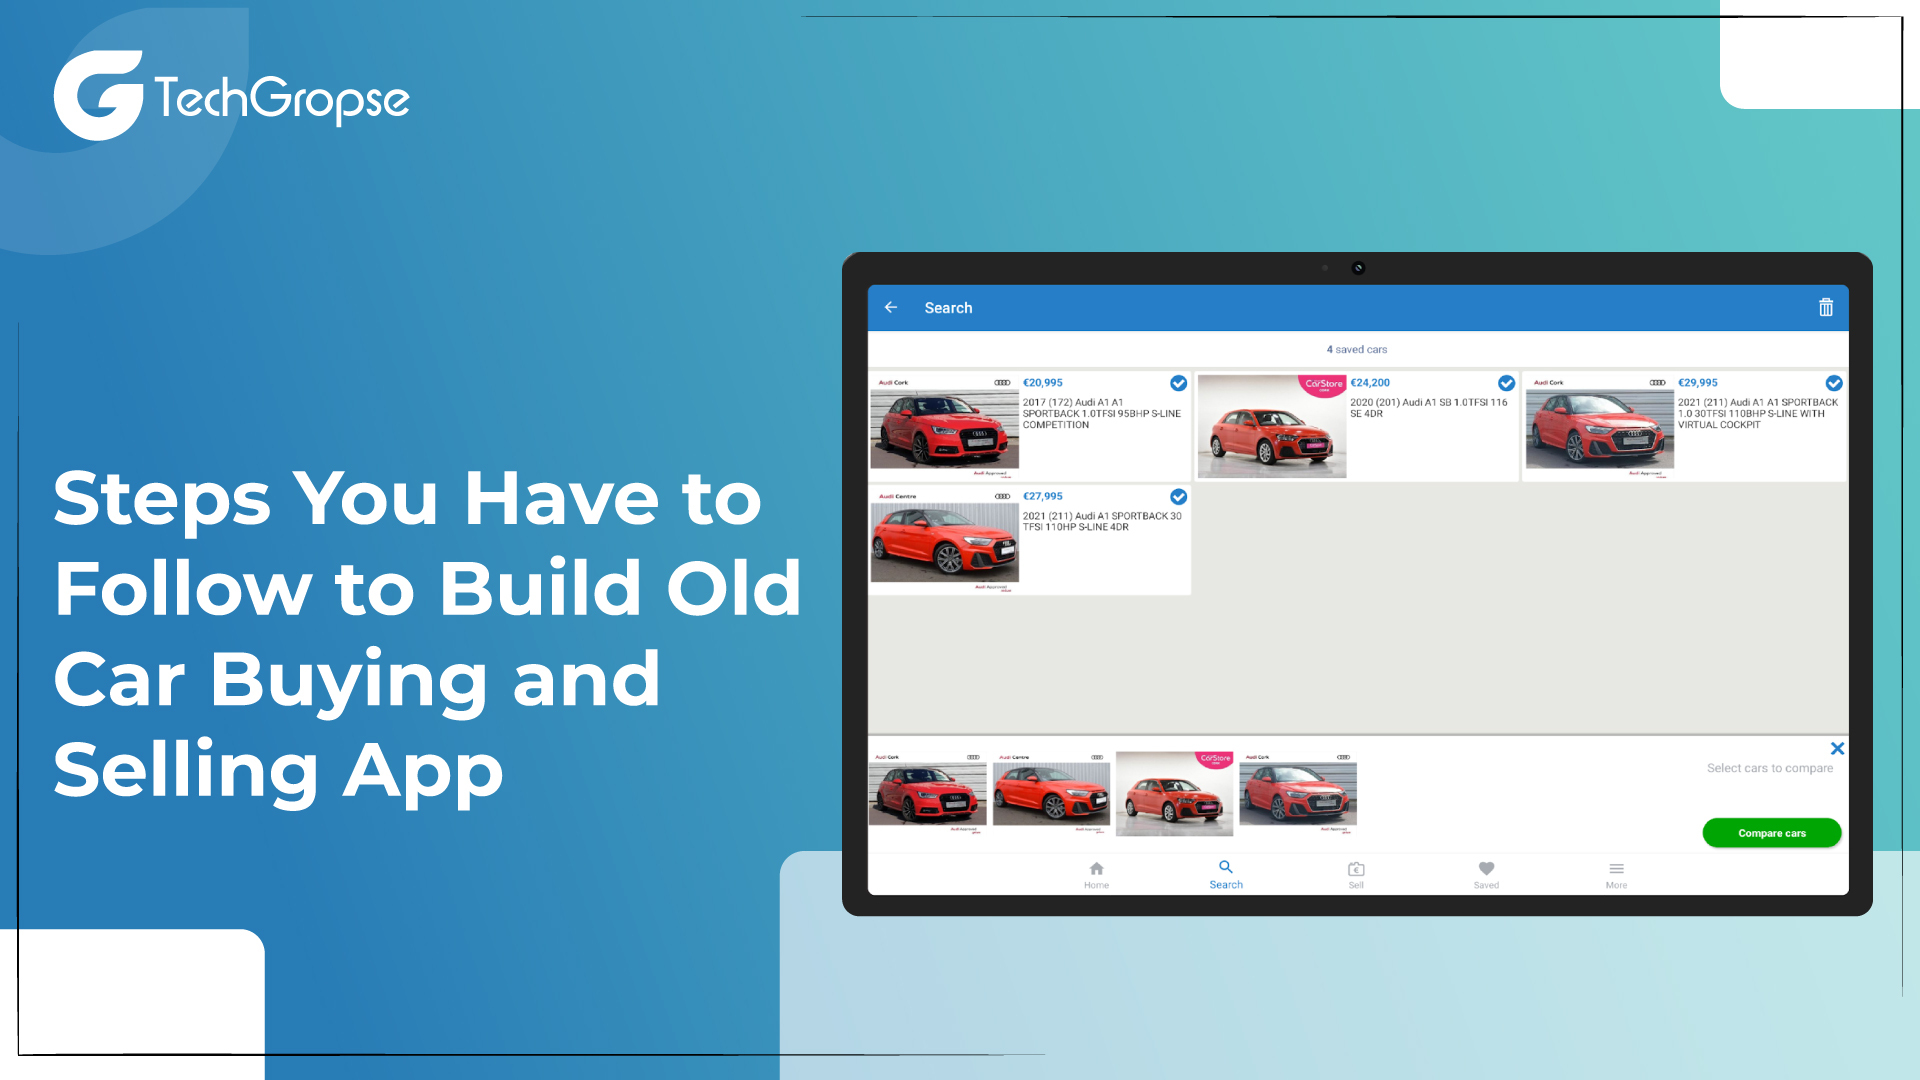 Steps You Have to Follow to Build Old Car Buying and Selling App